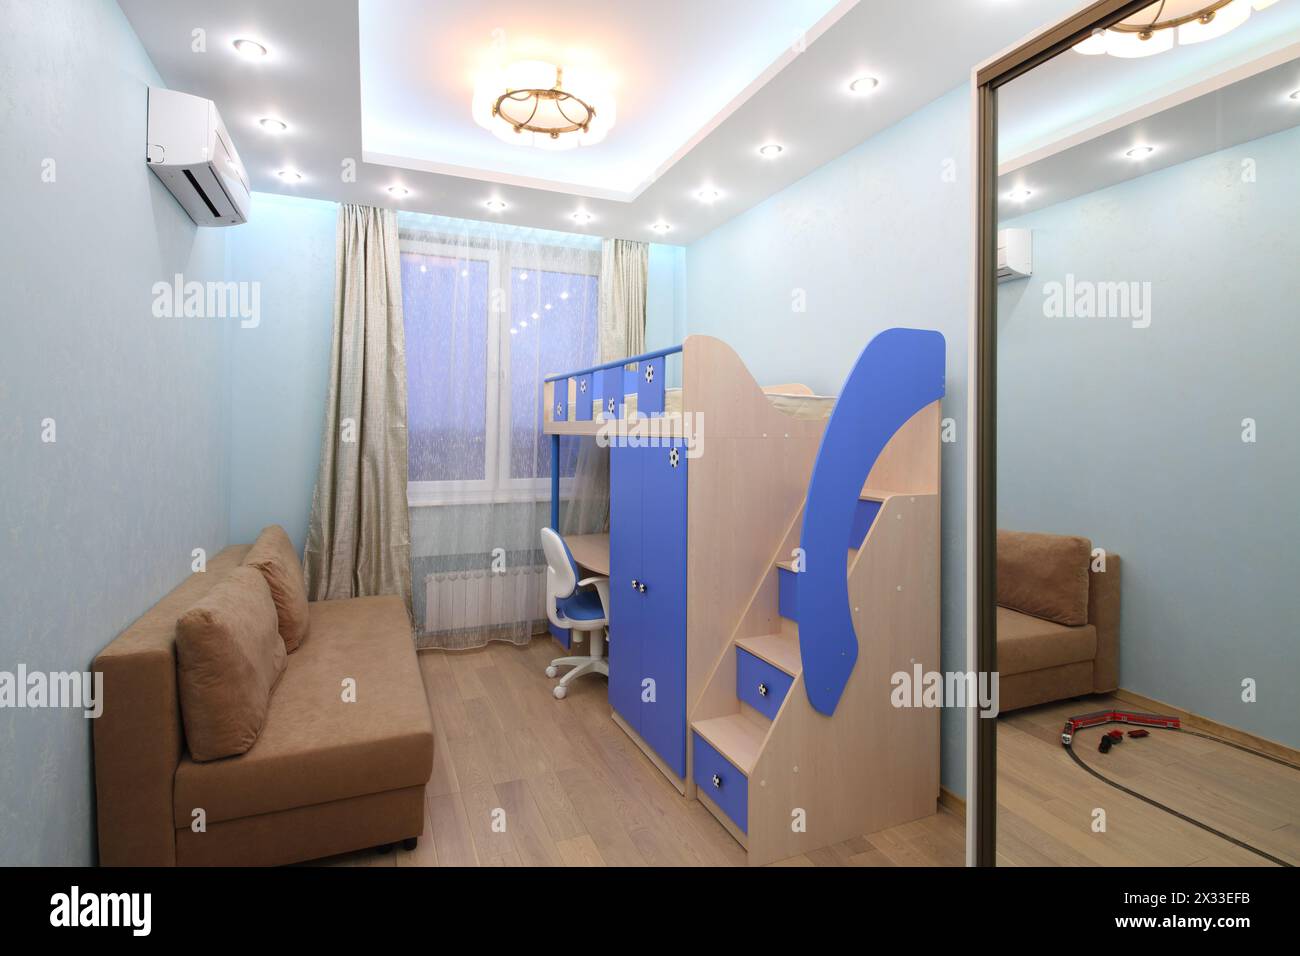 Interior room with blue walls for boy with a loft bed, sofa and sliding door wardrobe Stock Photo